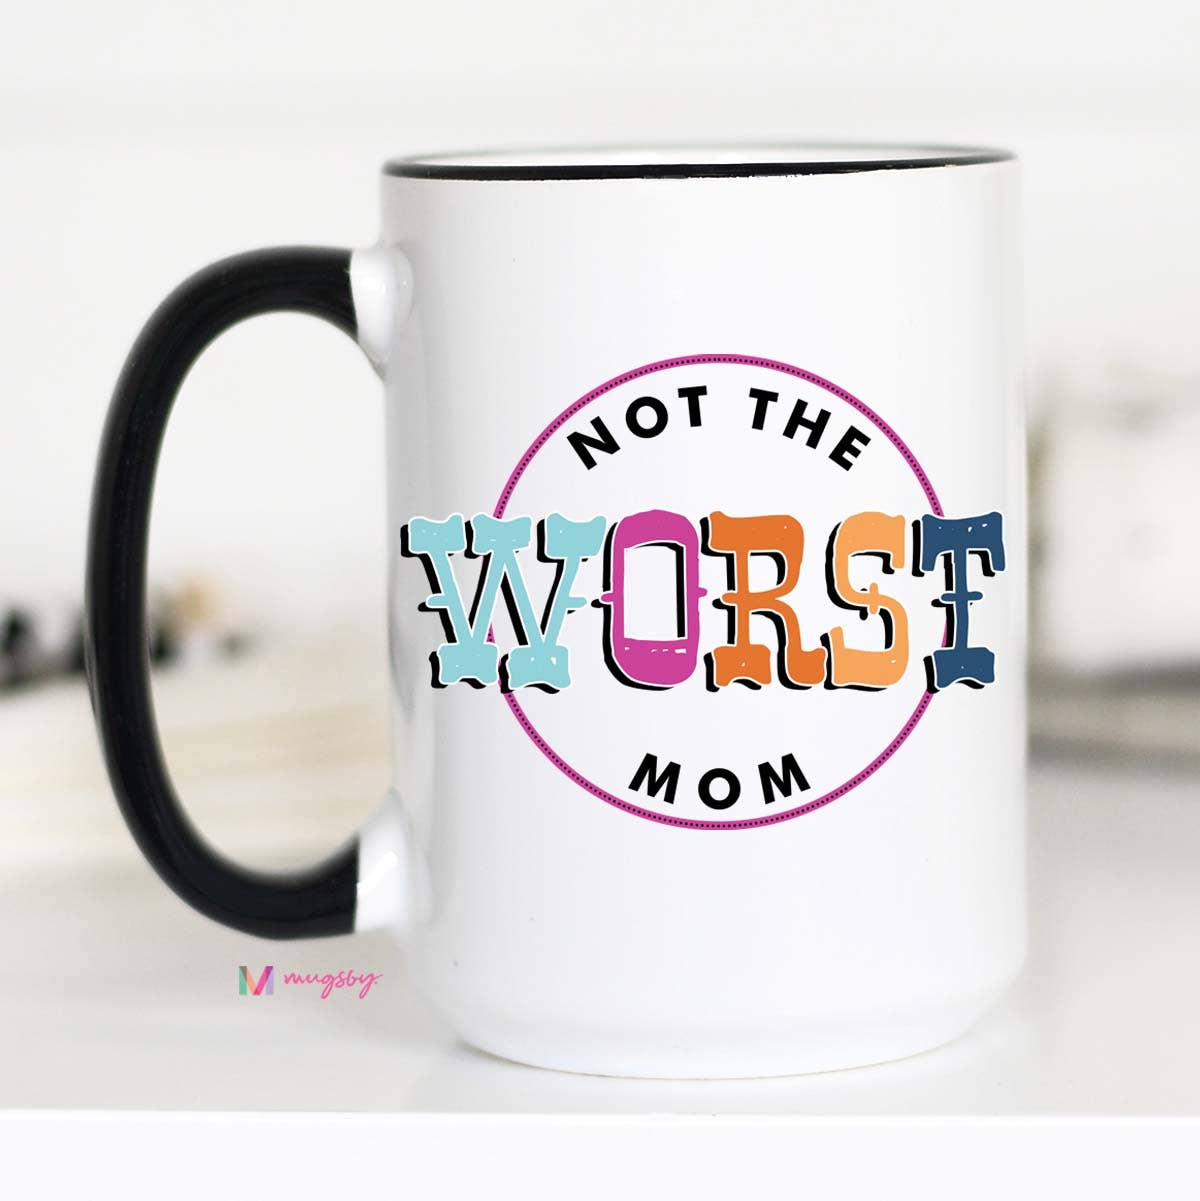 Mugsby - Not the Worst Mom Mother's Day Mug